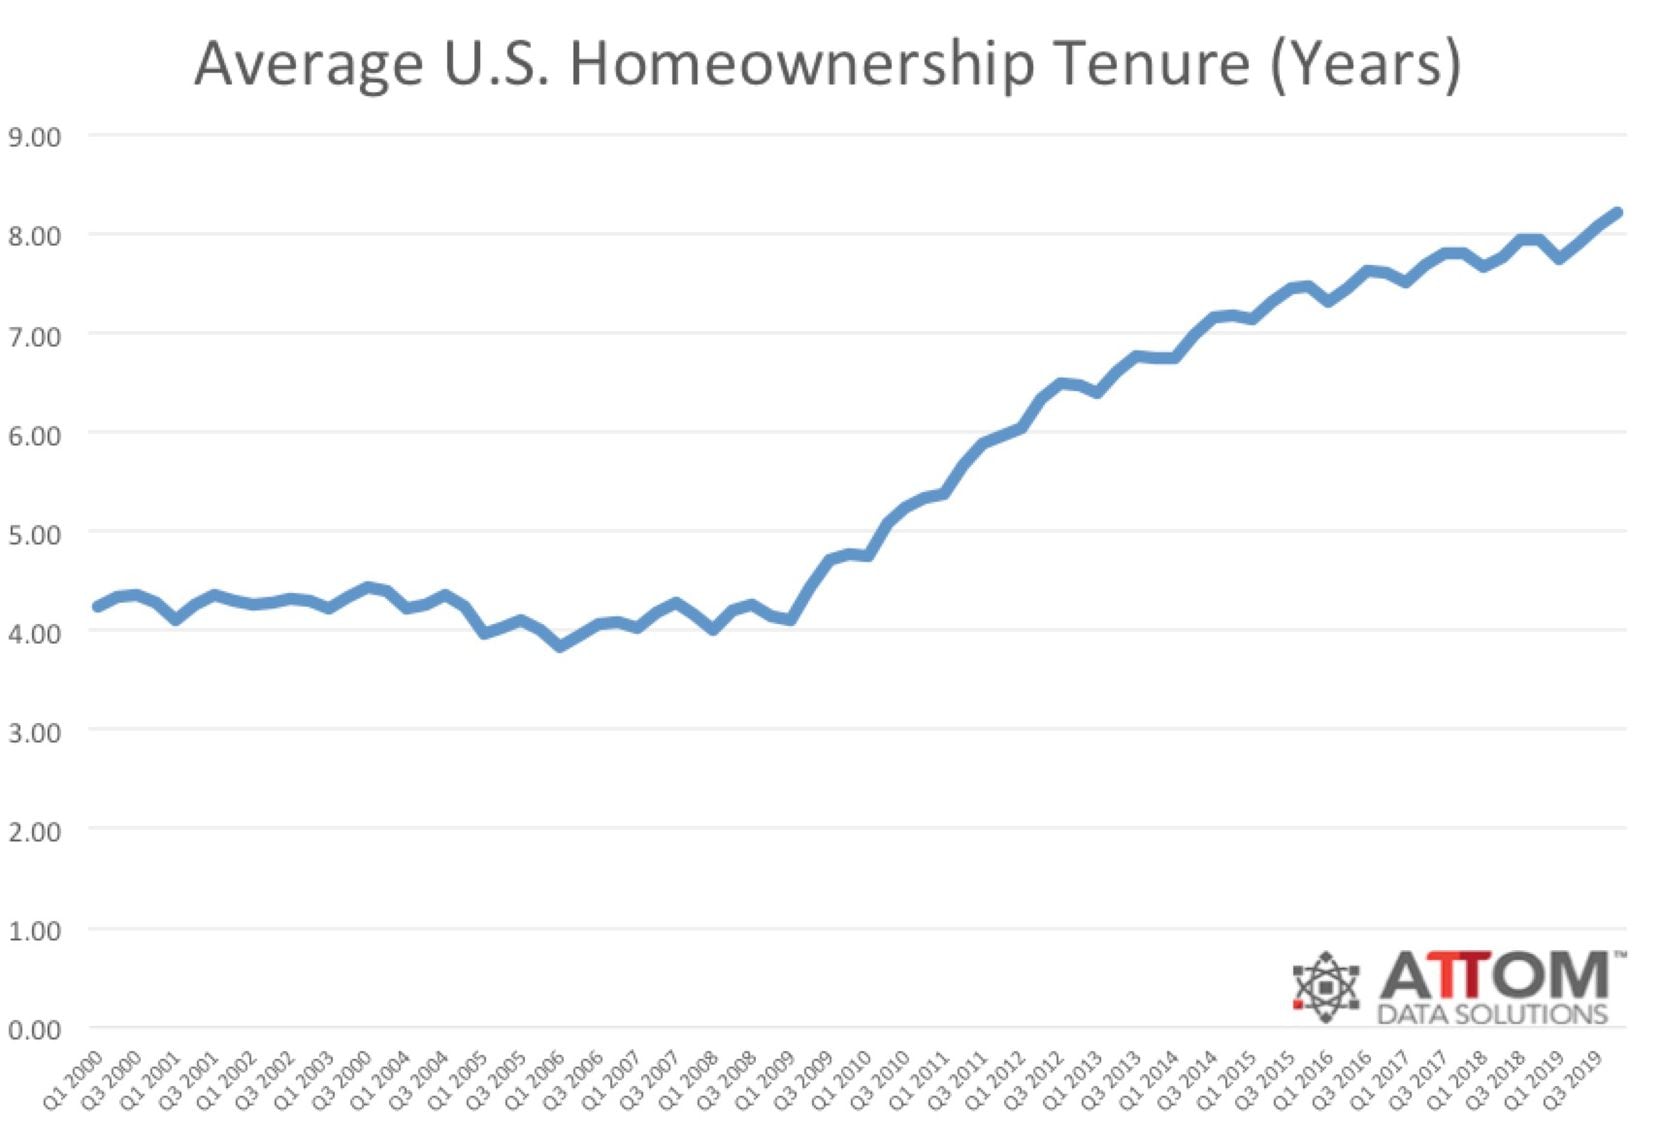 Average U.S. homeowner tenure is at an all-time high.